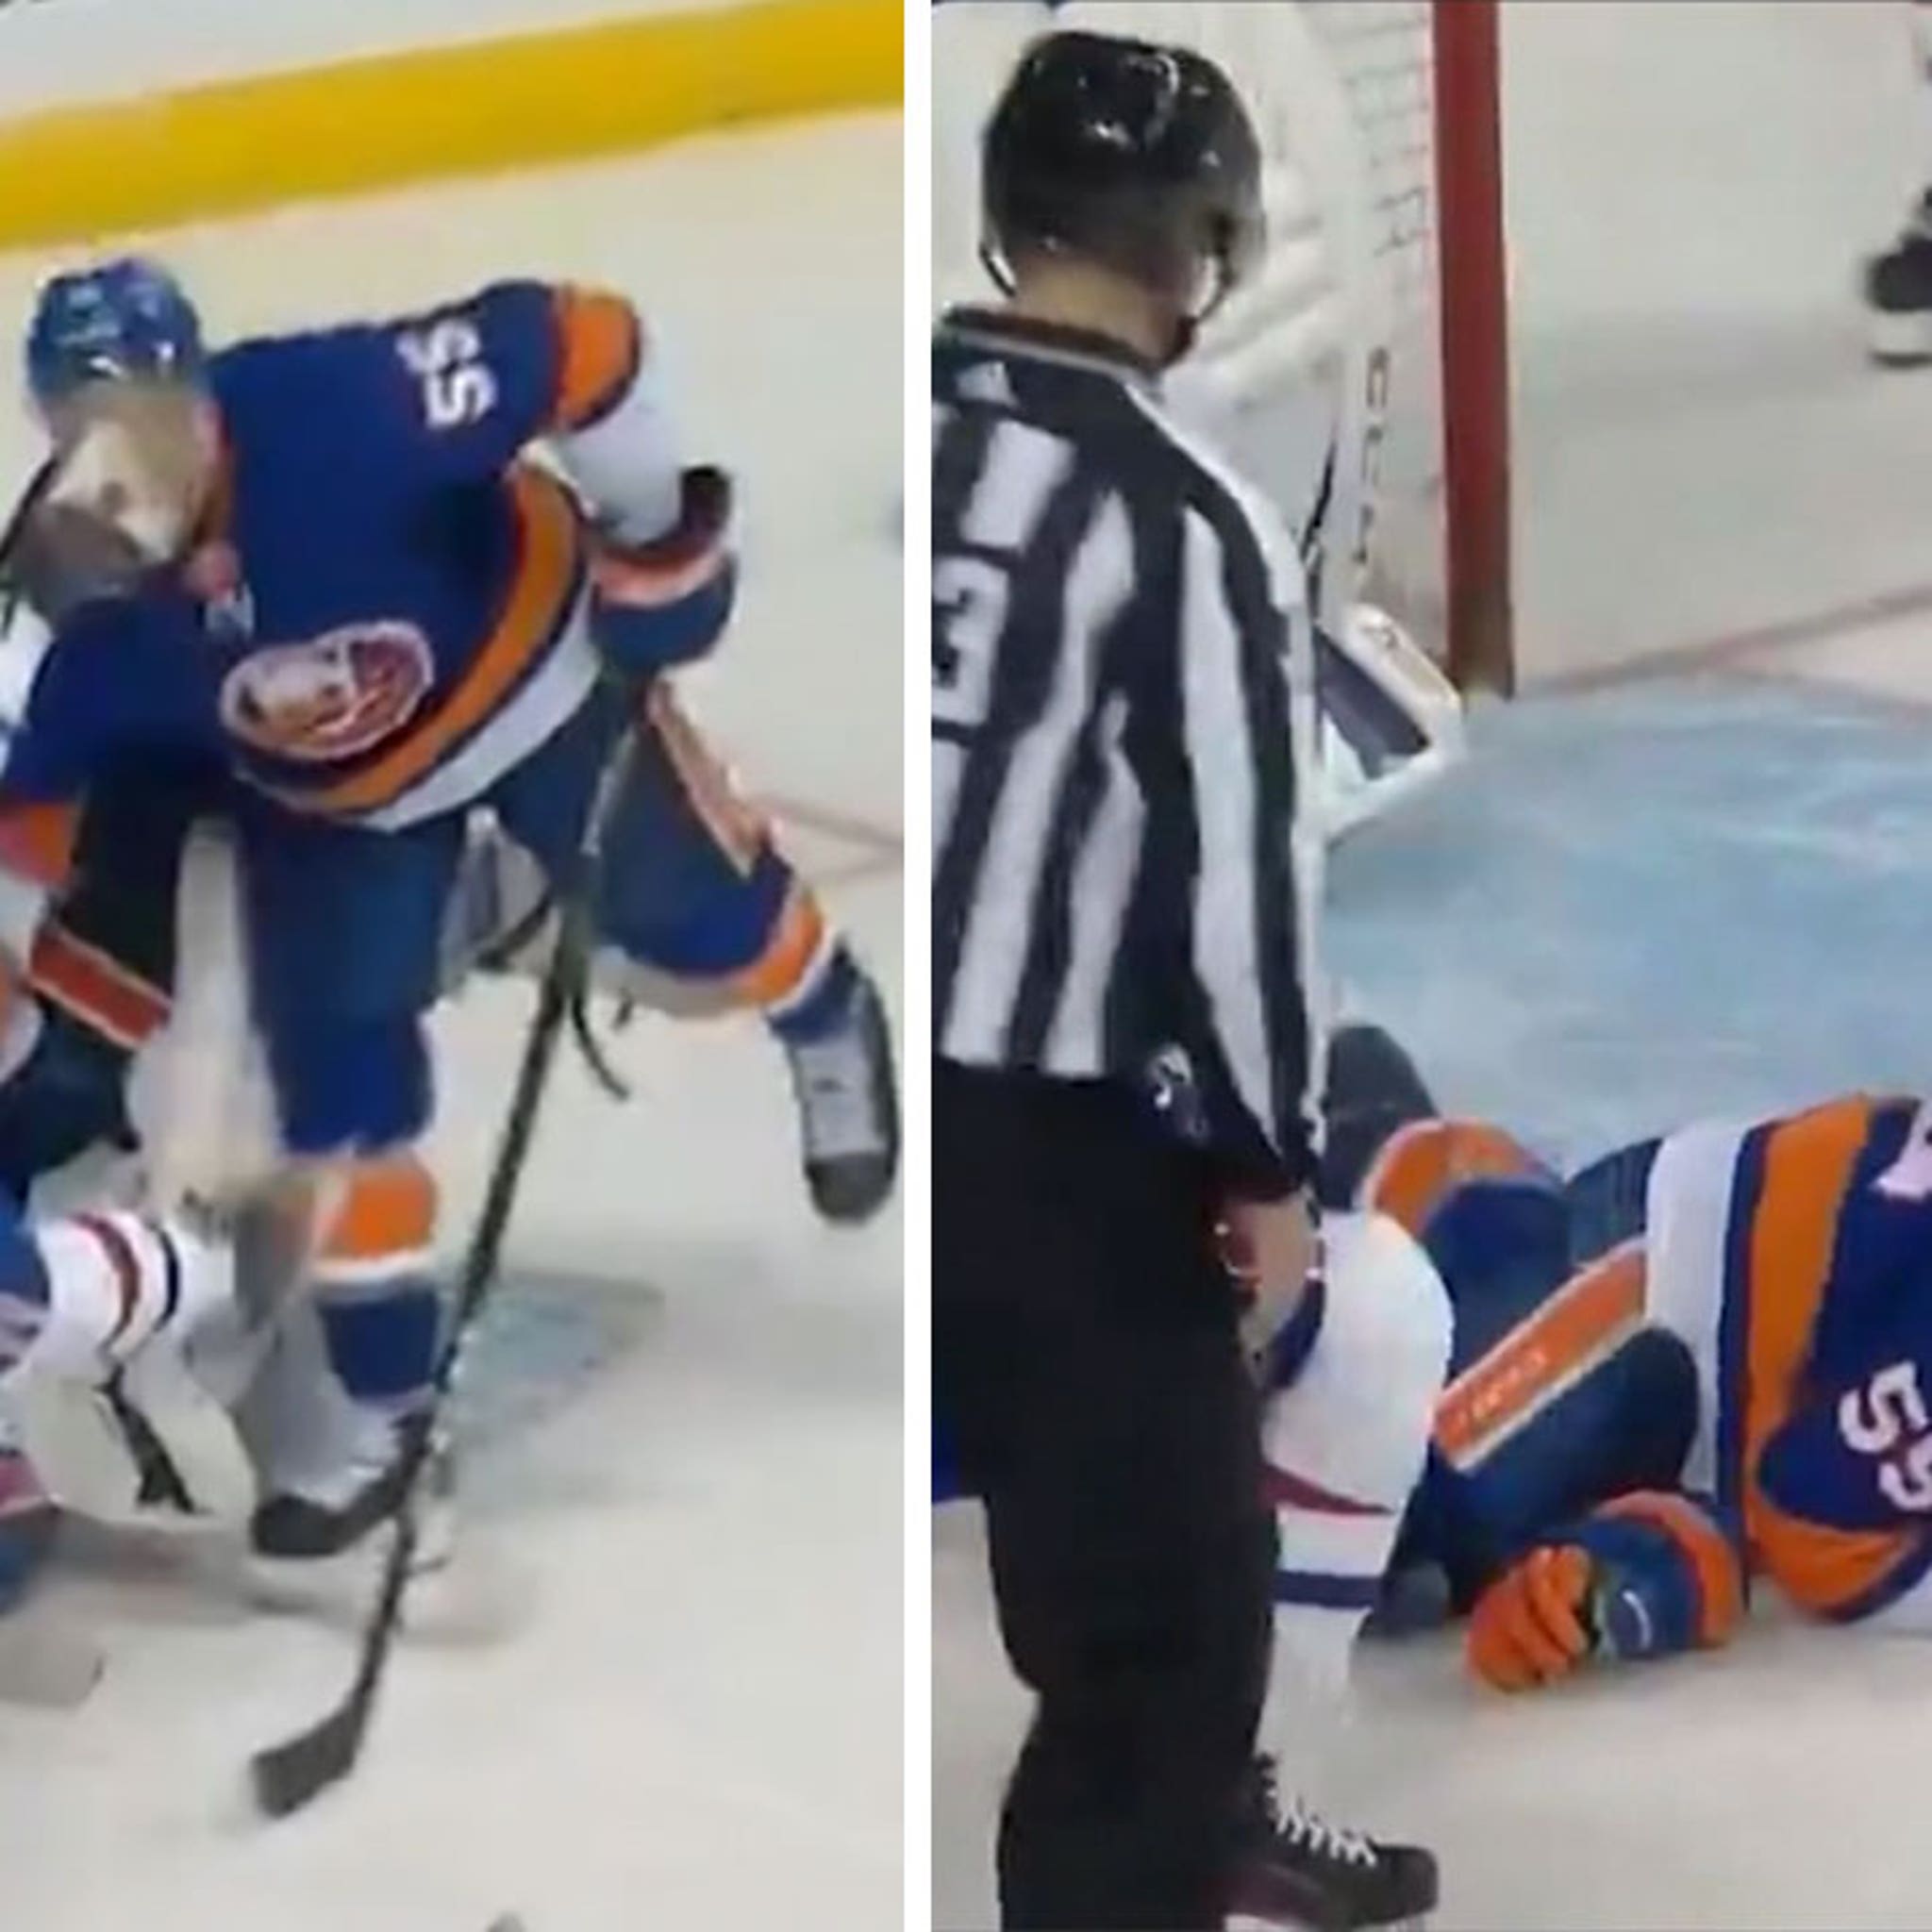 Miraculously Johnny Boychuk is not dealing with any serious injury